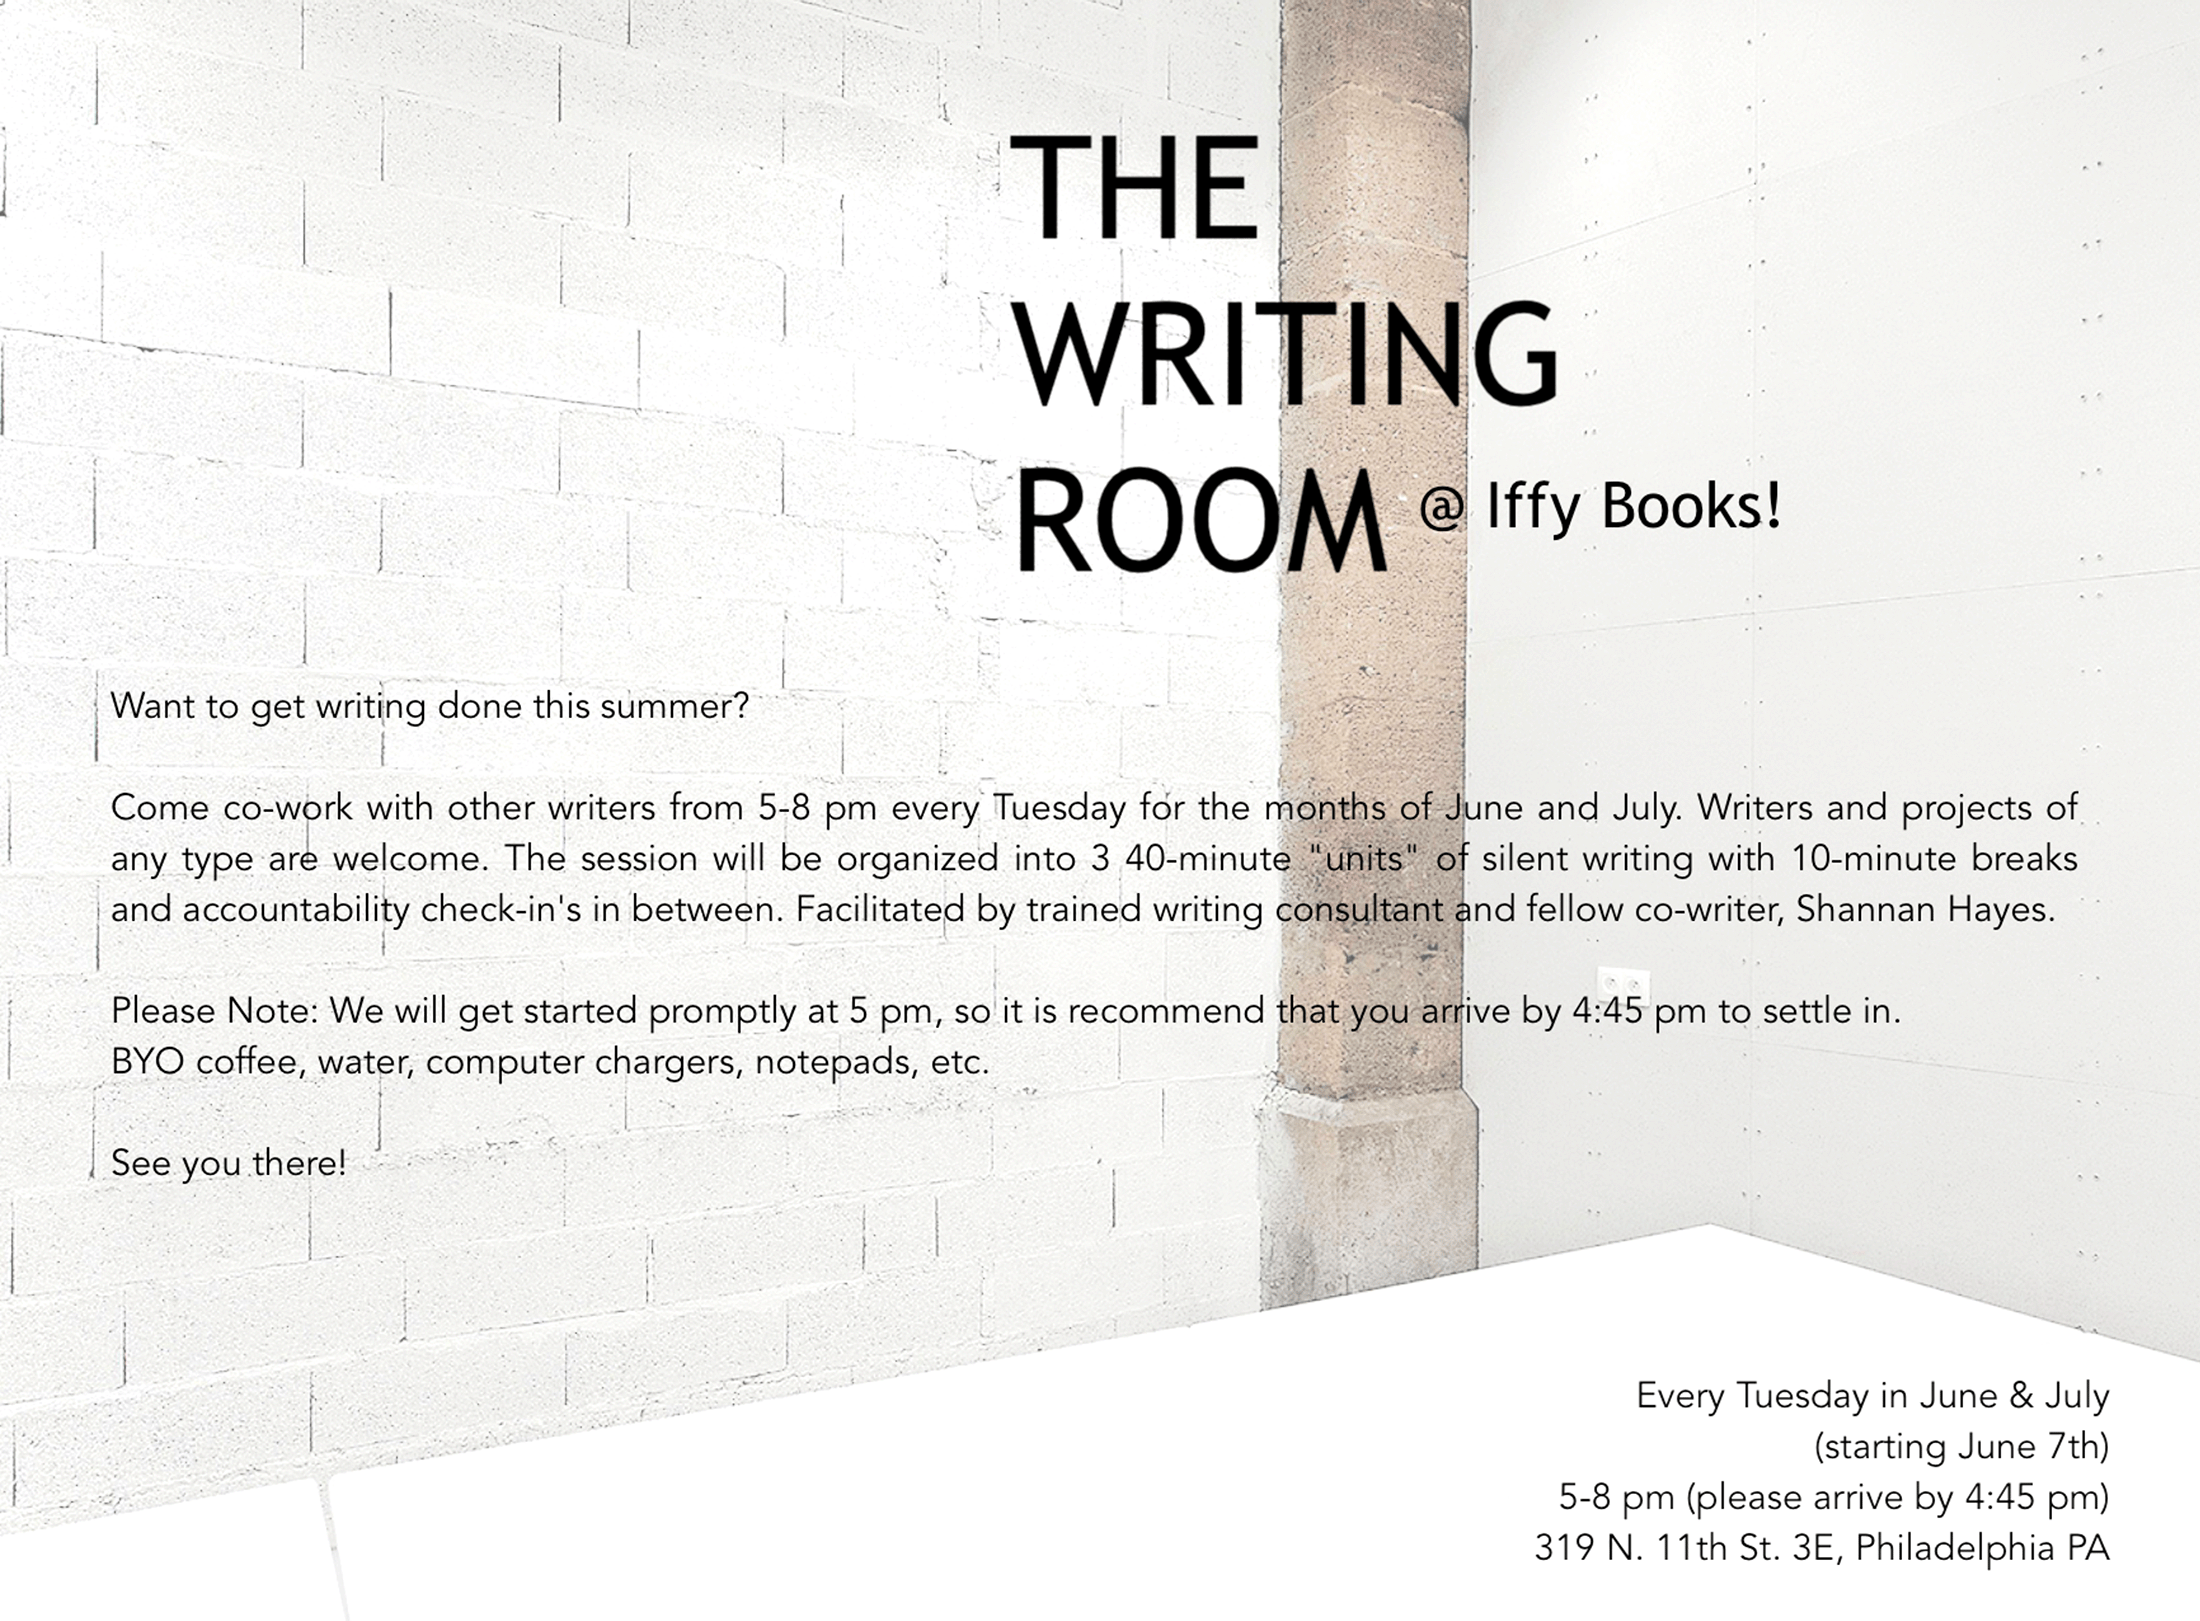 Photo of a white room and a white table, with the following text overlaid: THE WRITING ROOM @ Iffy Books / Want to get writing done this summer? / Come co-work with other writers from 5–8 pm every Tuesday for the months of June and July. Writers and projects of any type are welcome. The session will be organized into 3 40-minute "units" of silent writing with 10-minute breaks and accountability check-in's in between. Facilitated by trained writing consultant and fellow co-writer, Shannan Hayes. / Please note: We will get started promptly at 5 pm, so it is recommended that you arrive by 4:45 to settle in. BYO coffee, water, computer chargers, notepads, etc. / See you there!